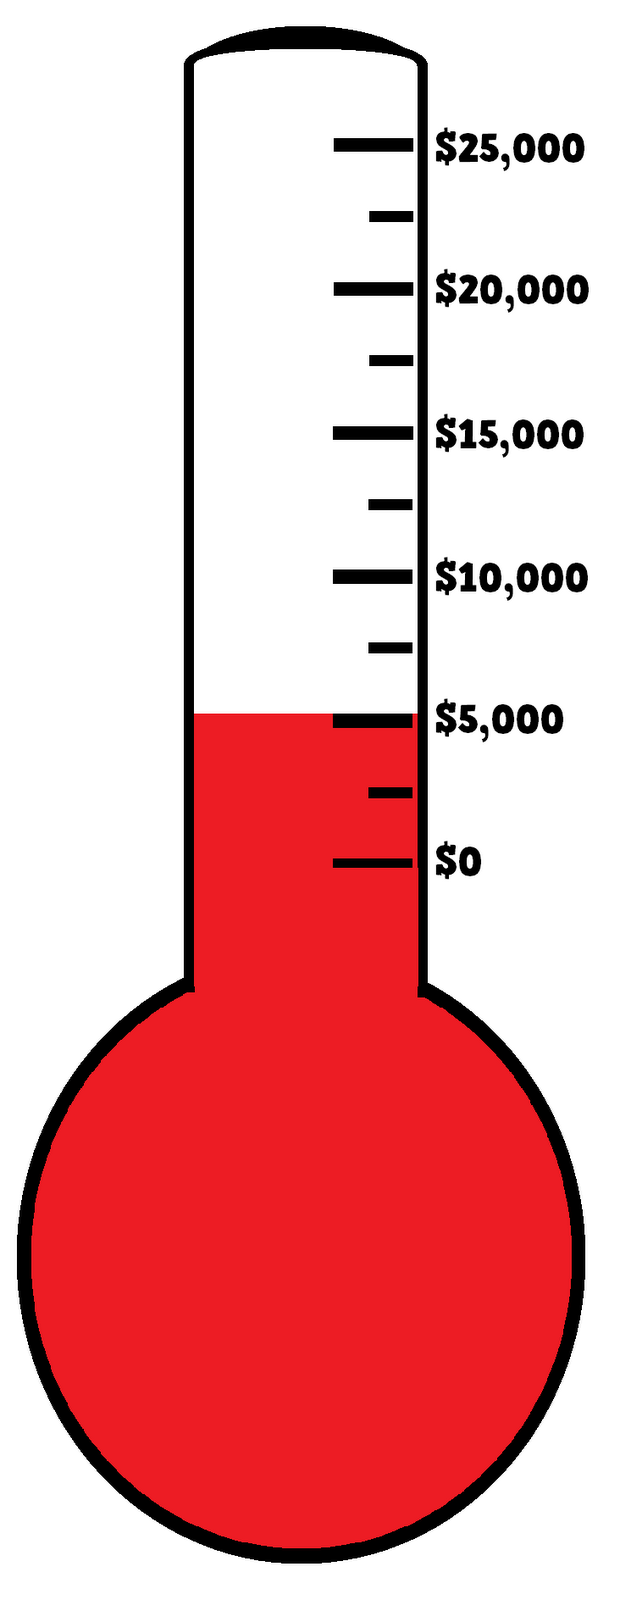 Free Blank Fundraising Thermometer Template, Download Free Blank